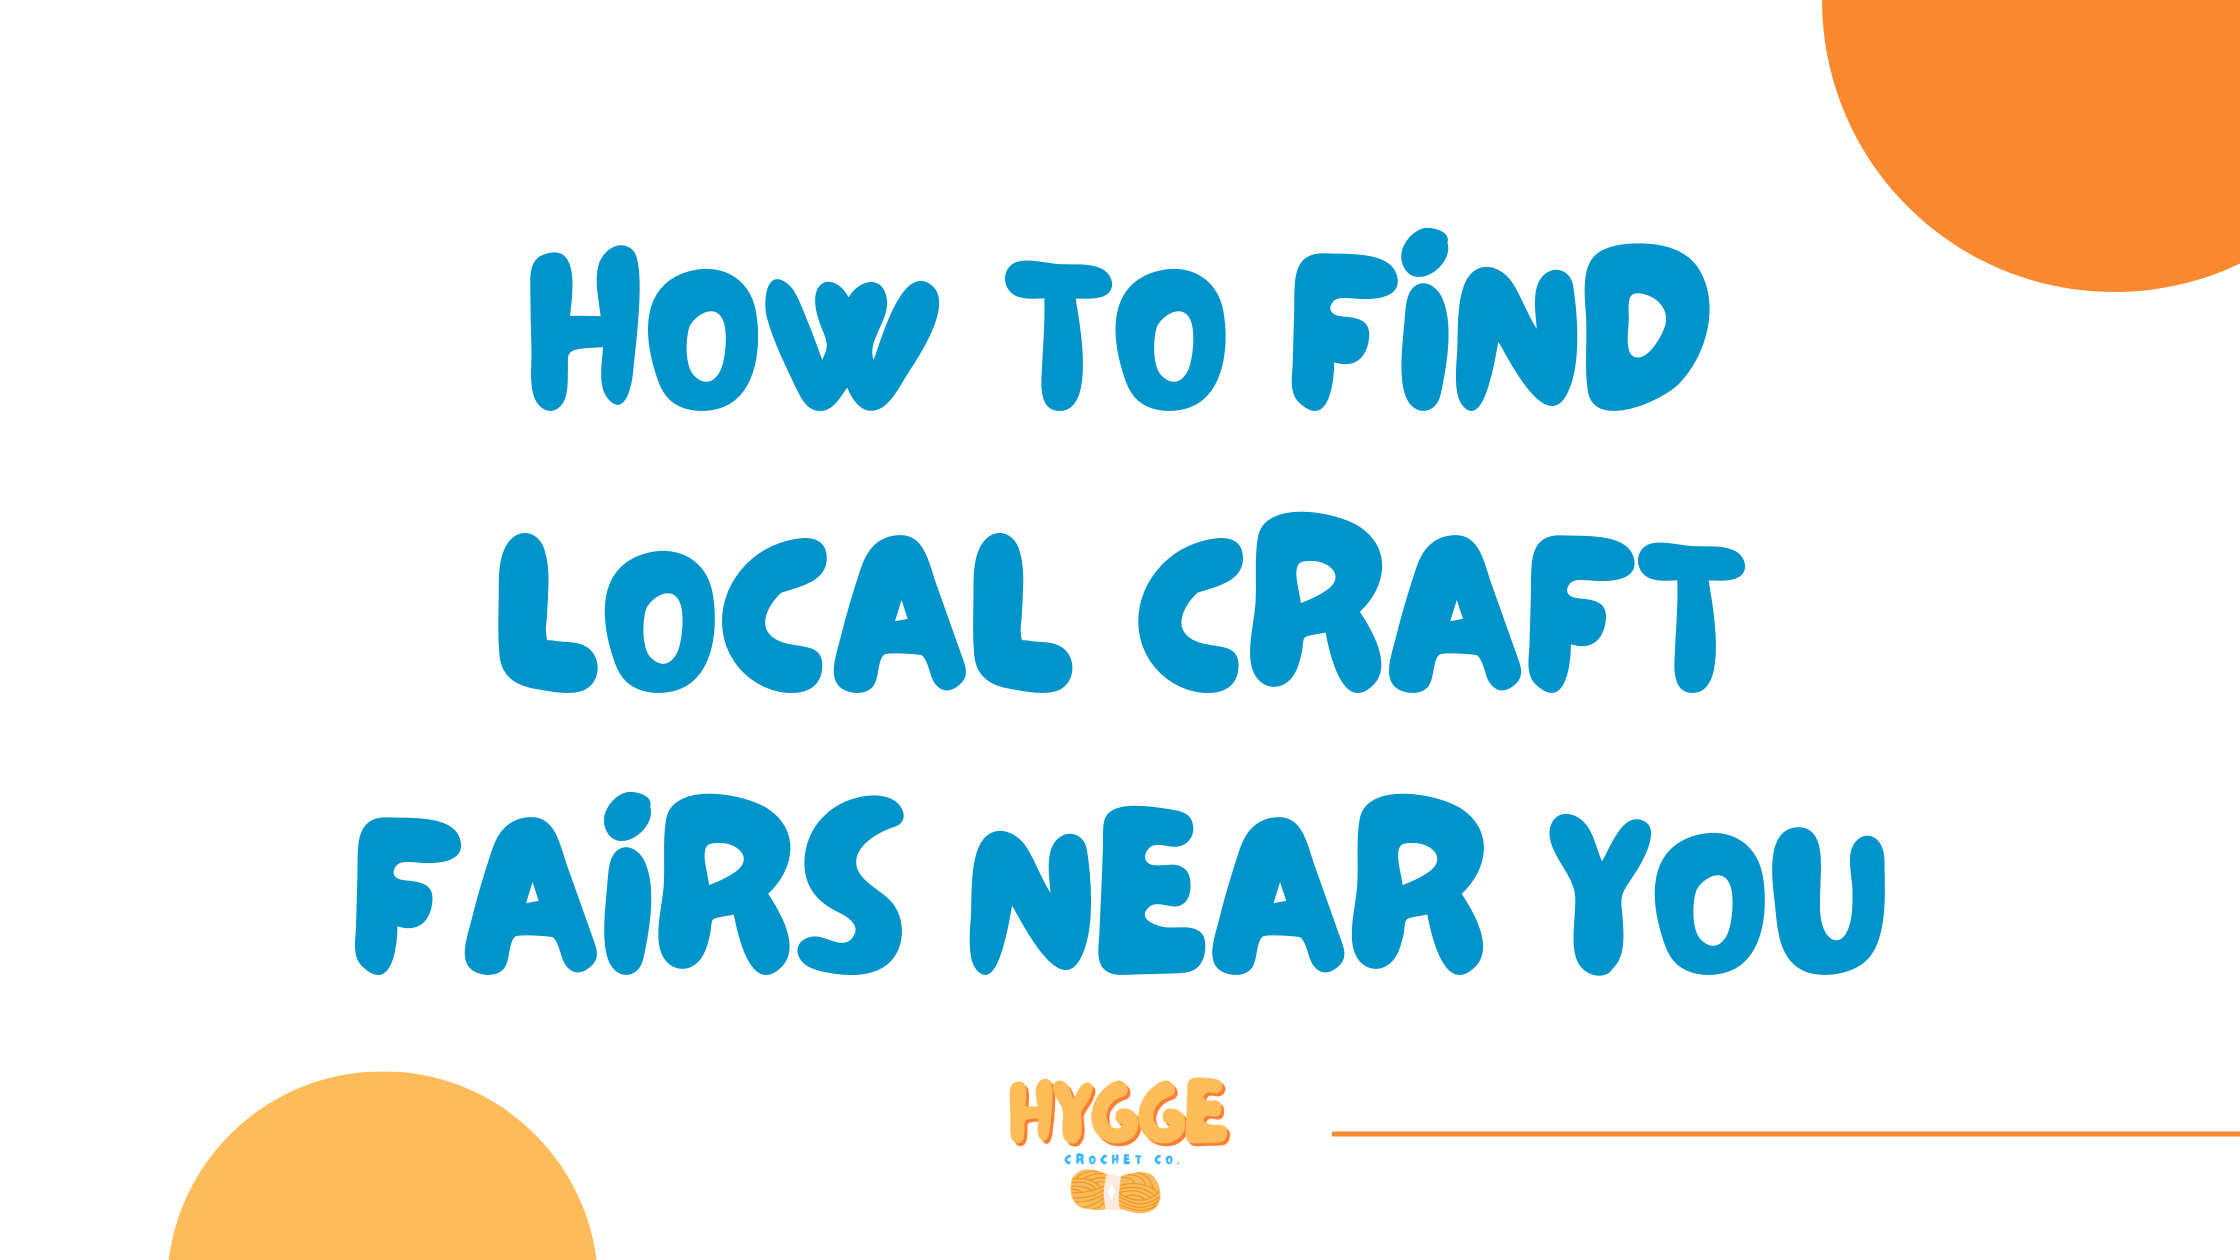 How to Find Local Craft Fairs Near You Hygge Crochet Co.